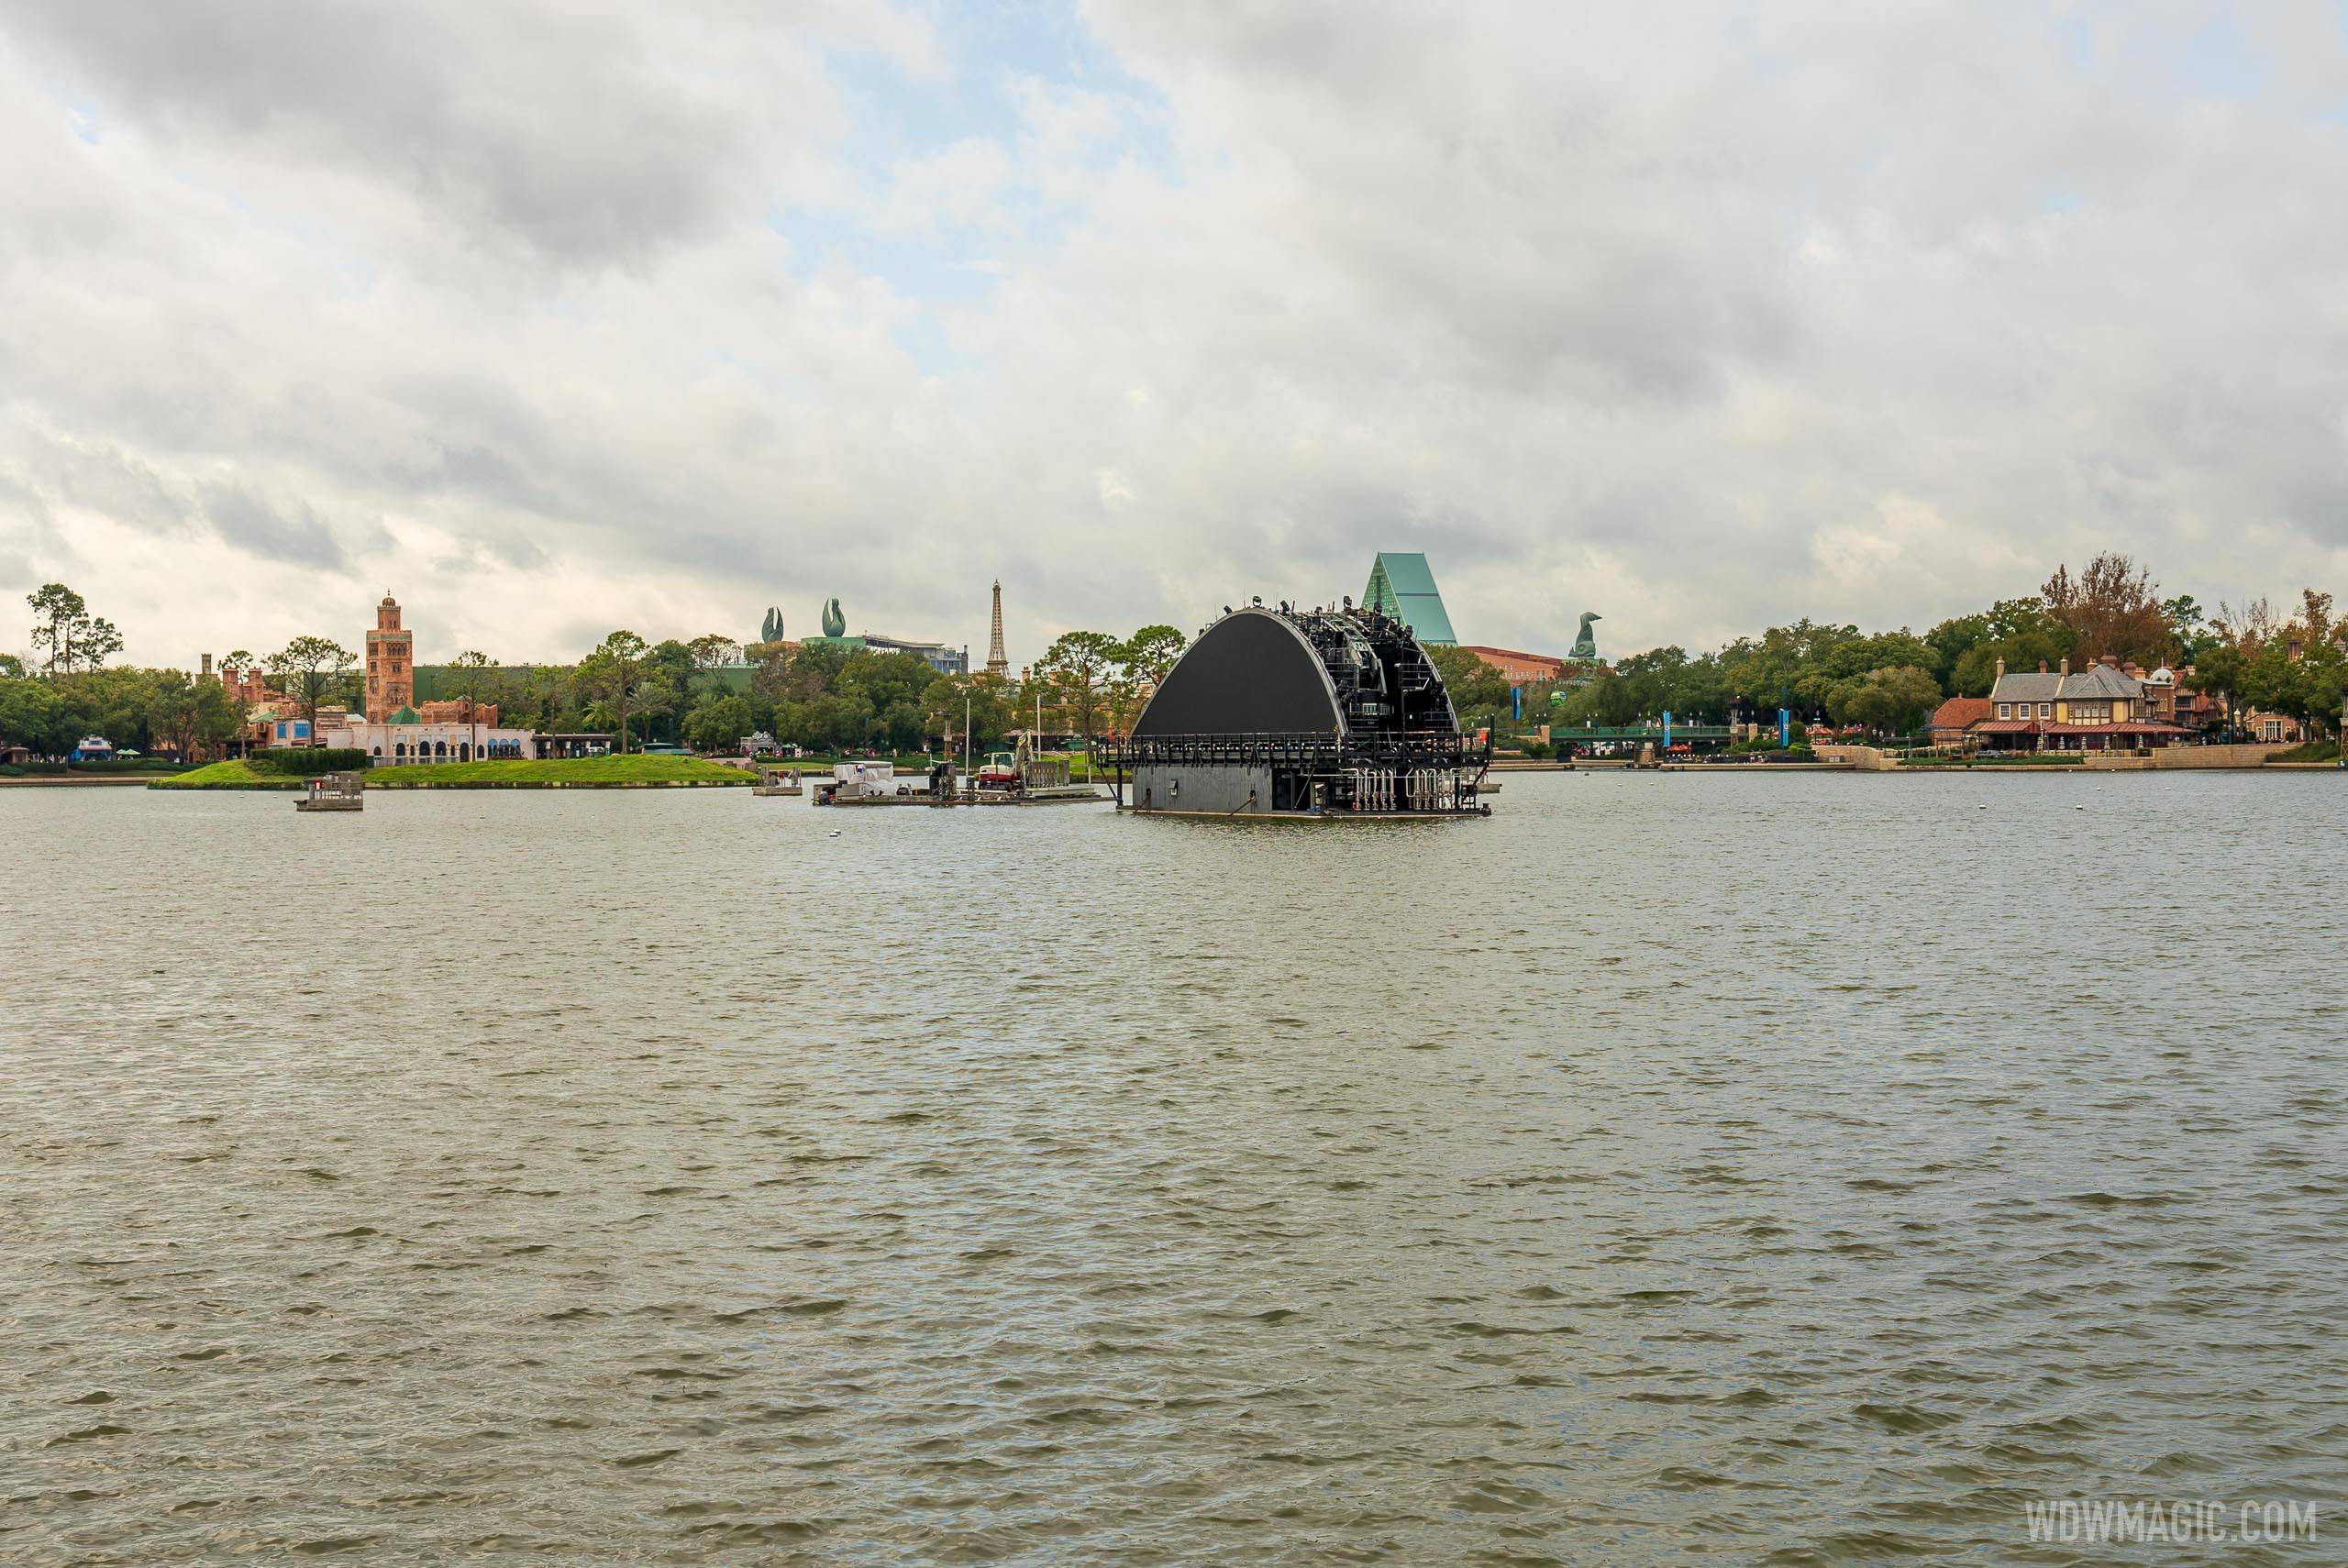 50mm 'Natural view' of the Harmonious show barge on World Showcase Lagoon